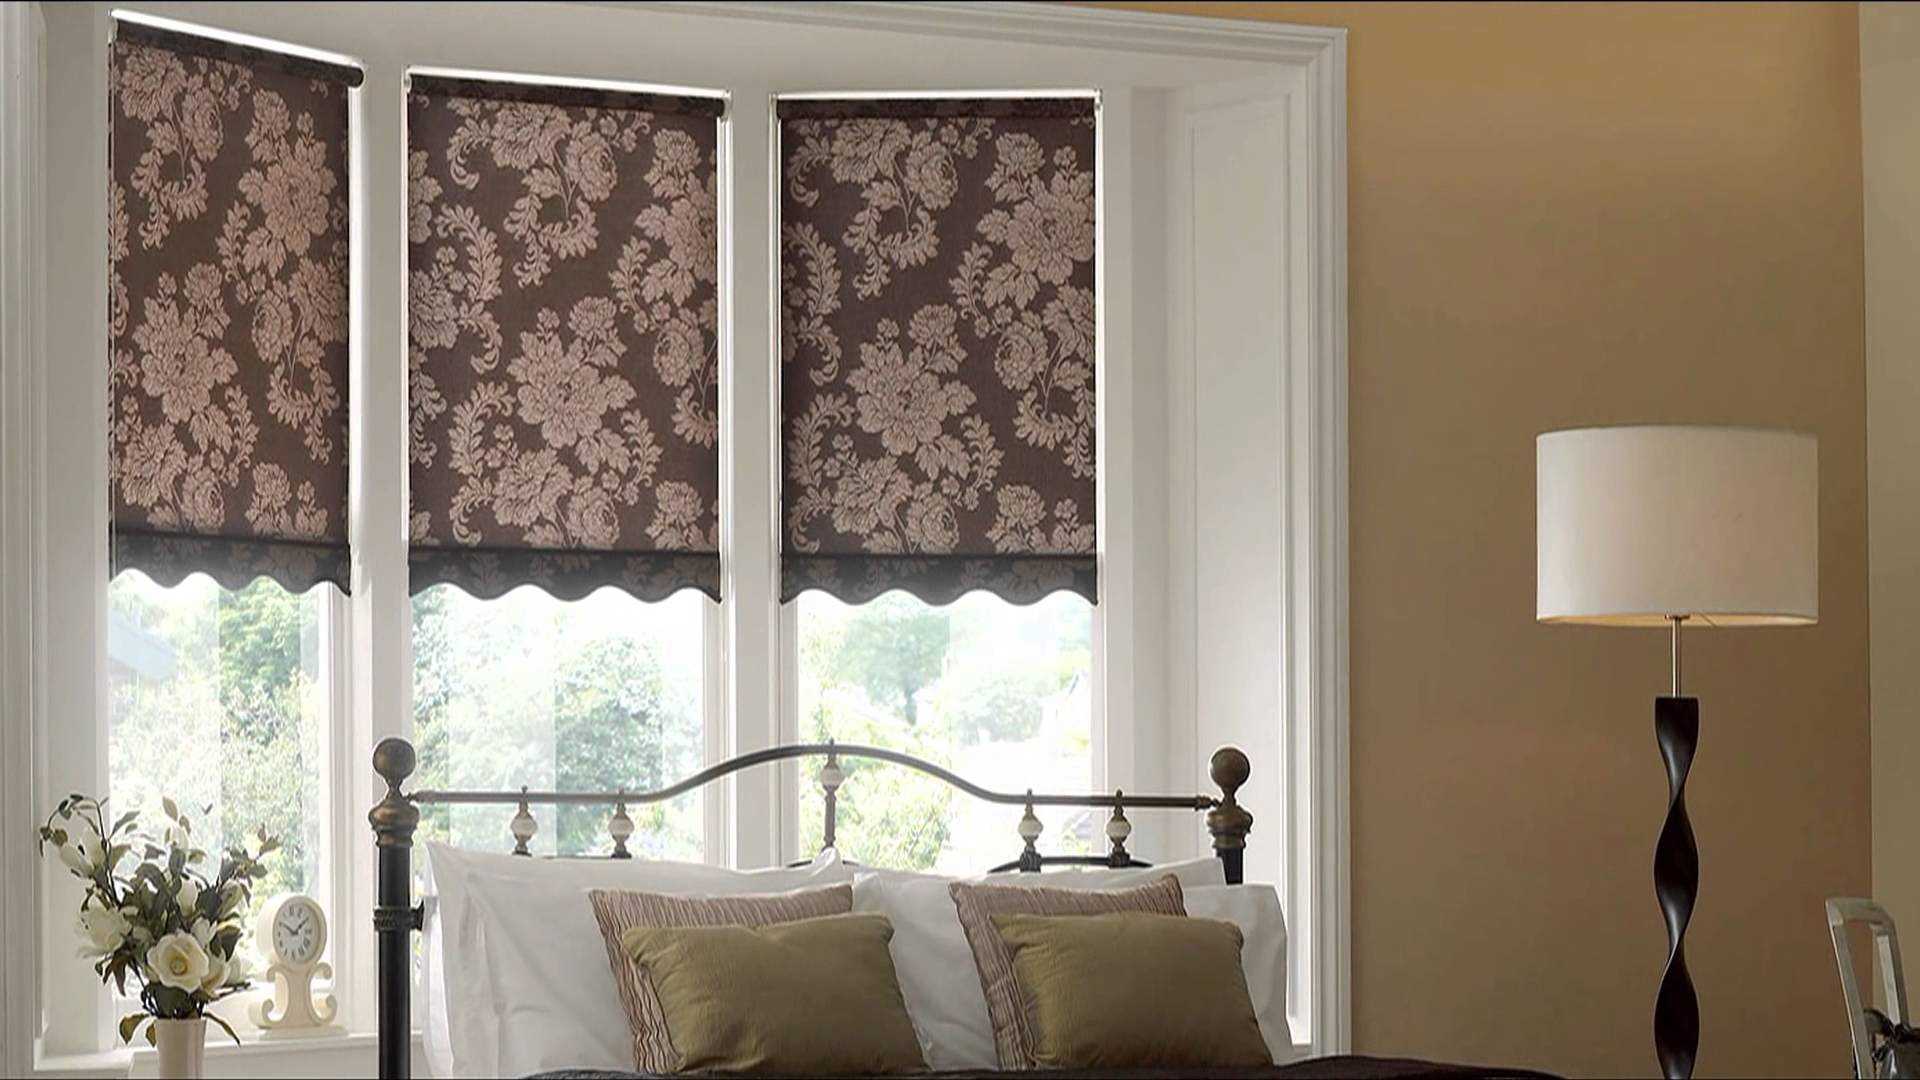 An example of using modern curtains in a beautiful room interior